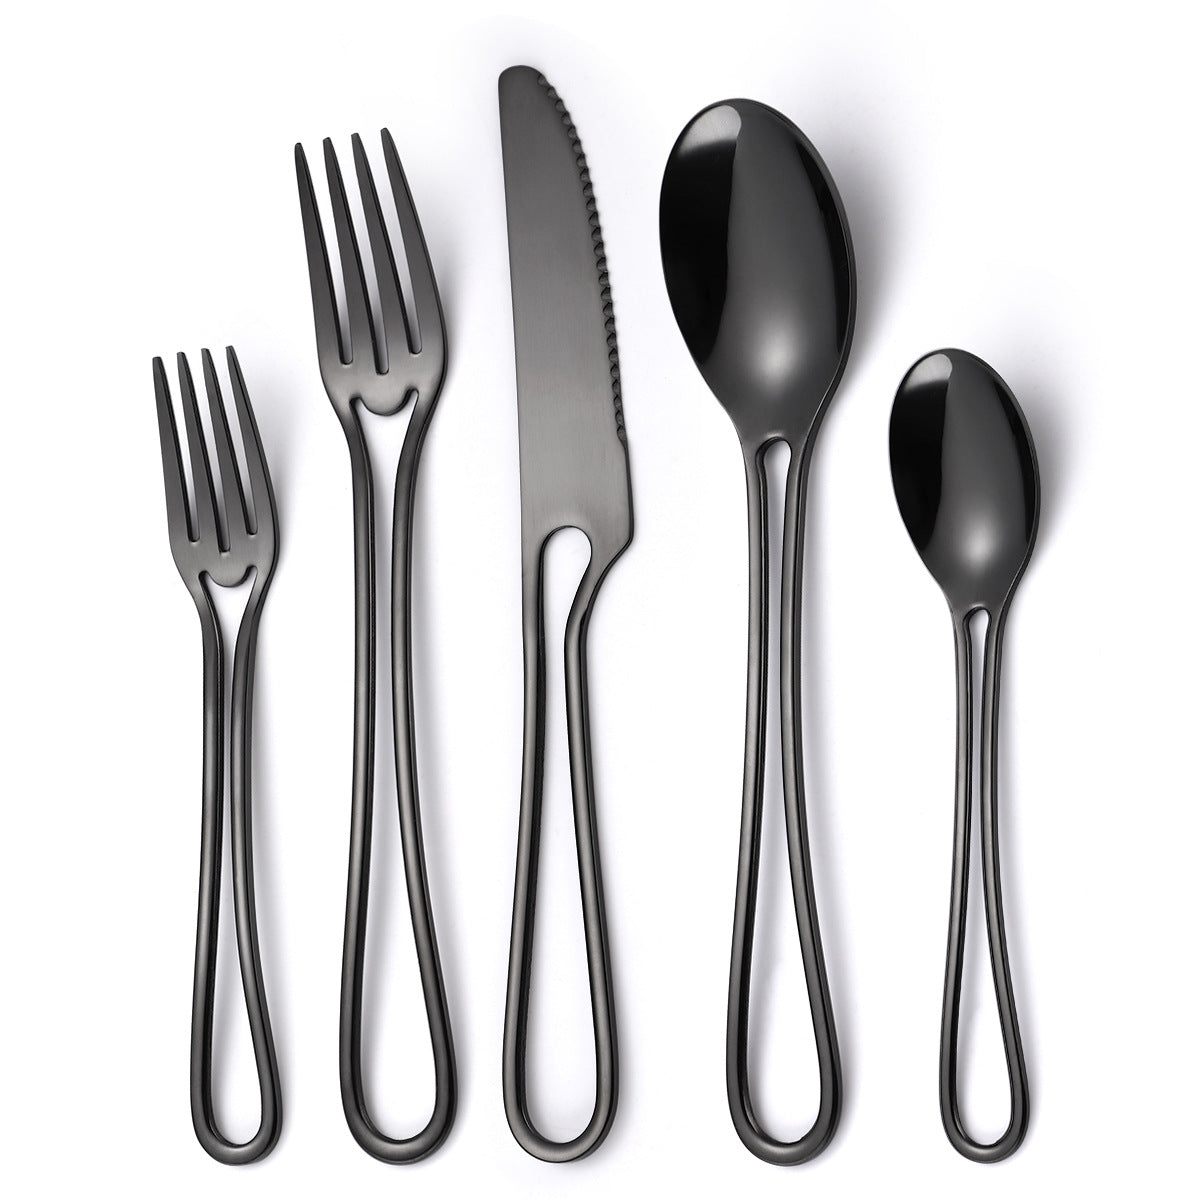 A variety of Sleek Hollow Cutlery Sets displayed, featuring elegant design and mirror-polished finish